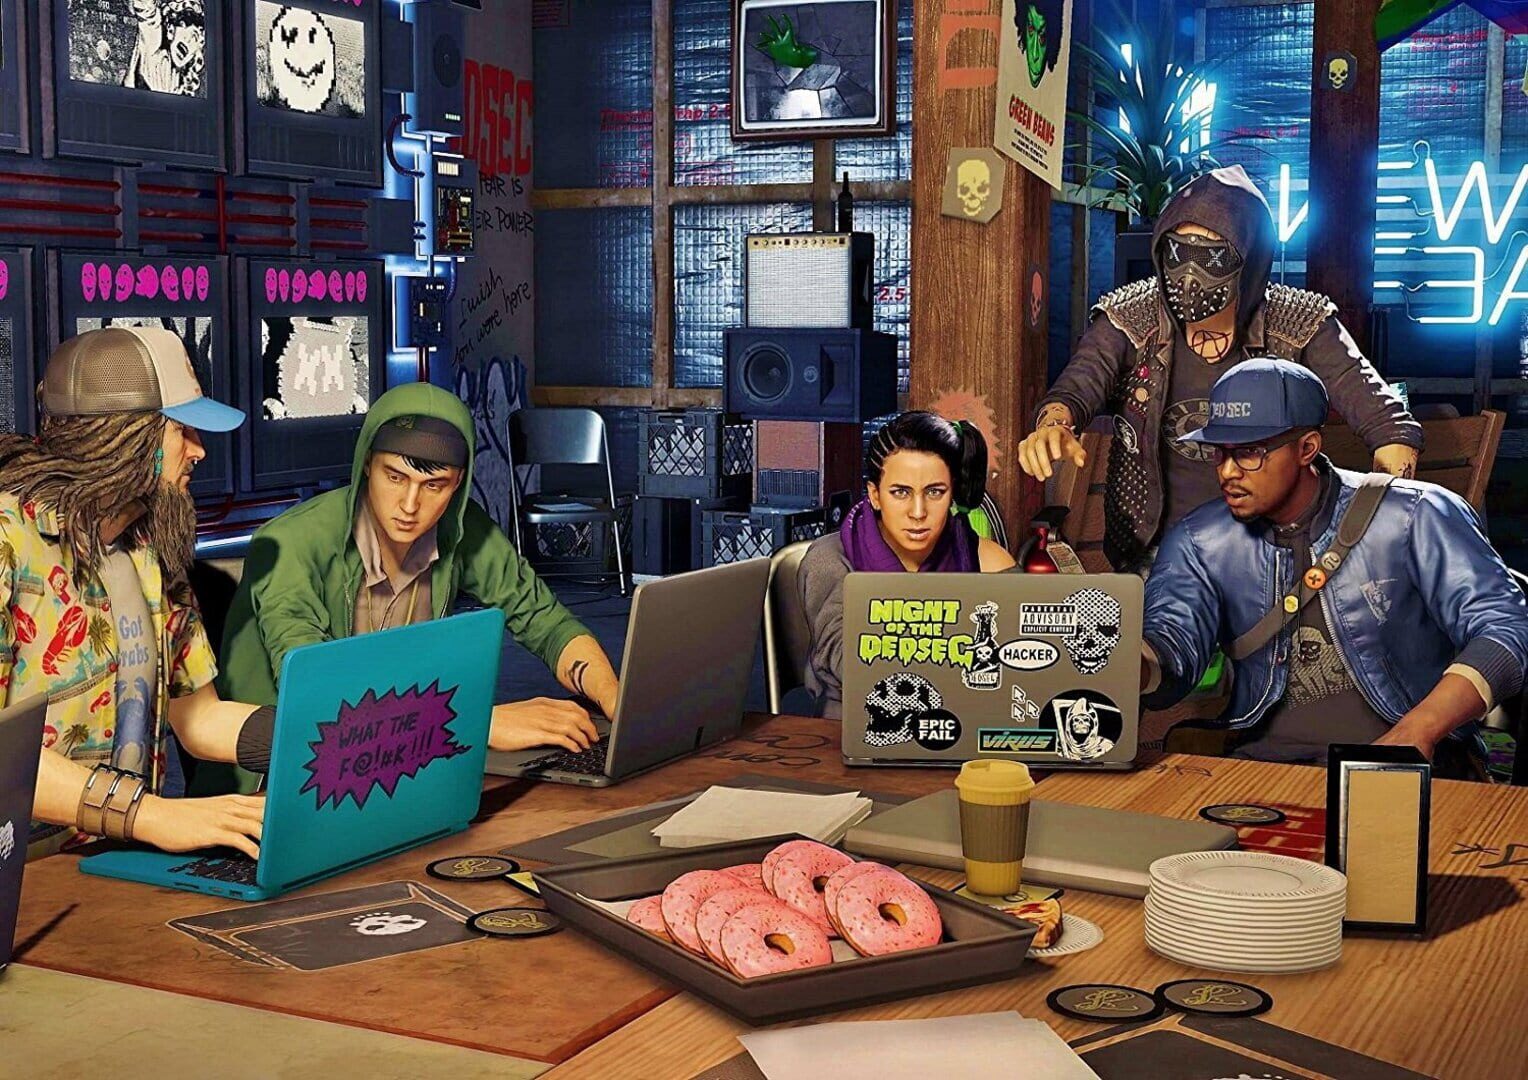 Watch Dogs 2 Image